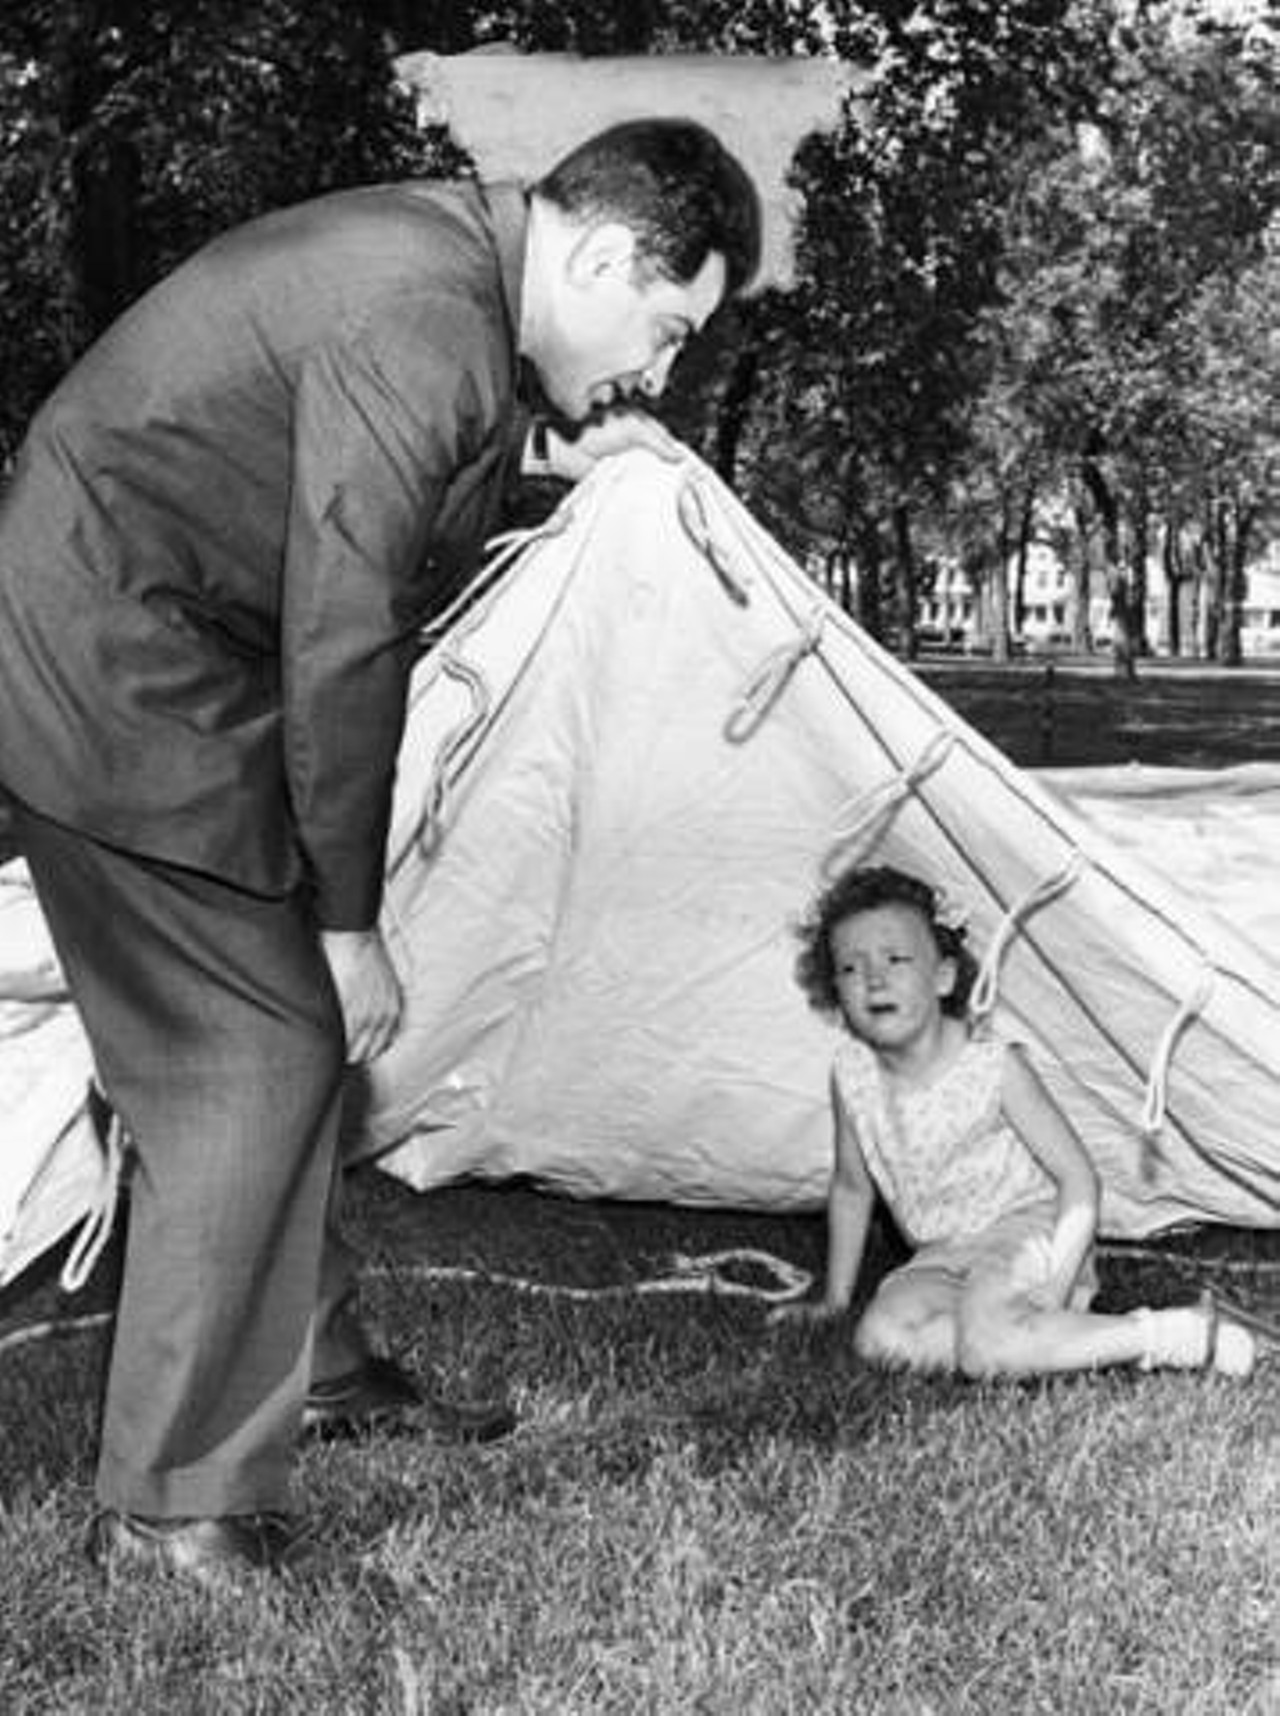 "Hiding under tent at Lincoln Park is Debra Brown, 6, of 2307 W. 5th St - found by David Antebi, director of W. Side Opportunity Fair ... Early visit to the Near West Side- Tremont Opportunity Fair was made today by Debra Brown, 6, of 2307 W. 5th St. shown being rescued from under the big tent at Lincoln Park by Fair Director David Antebi. The big tent will house many exhibits during the five-day celebration which begins tomorrow" -- photo verso.